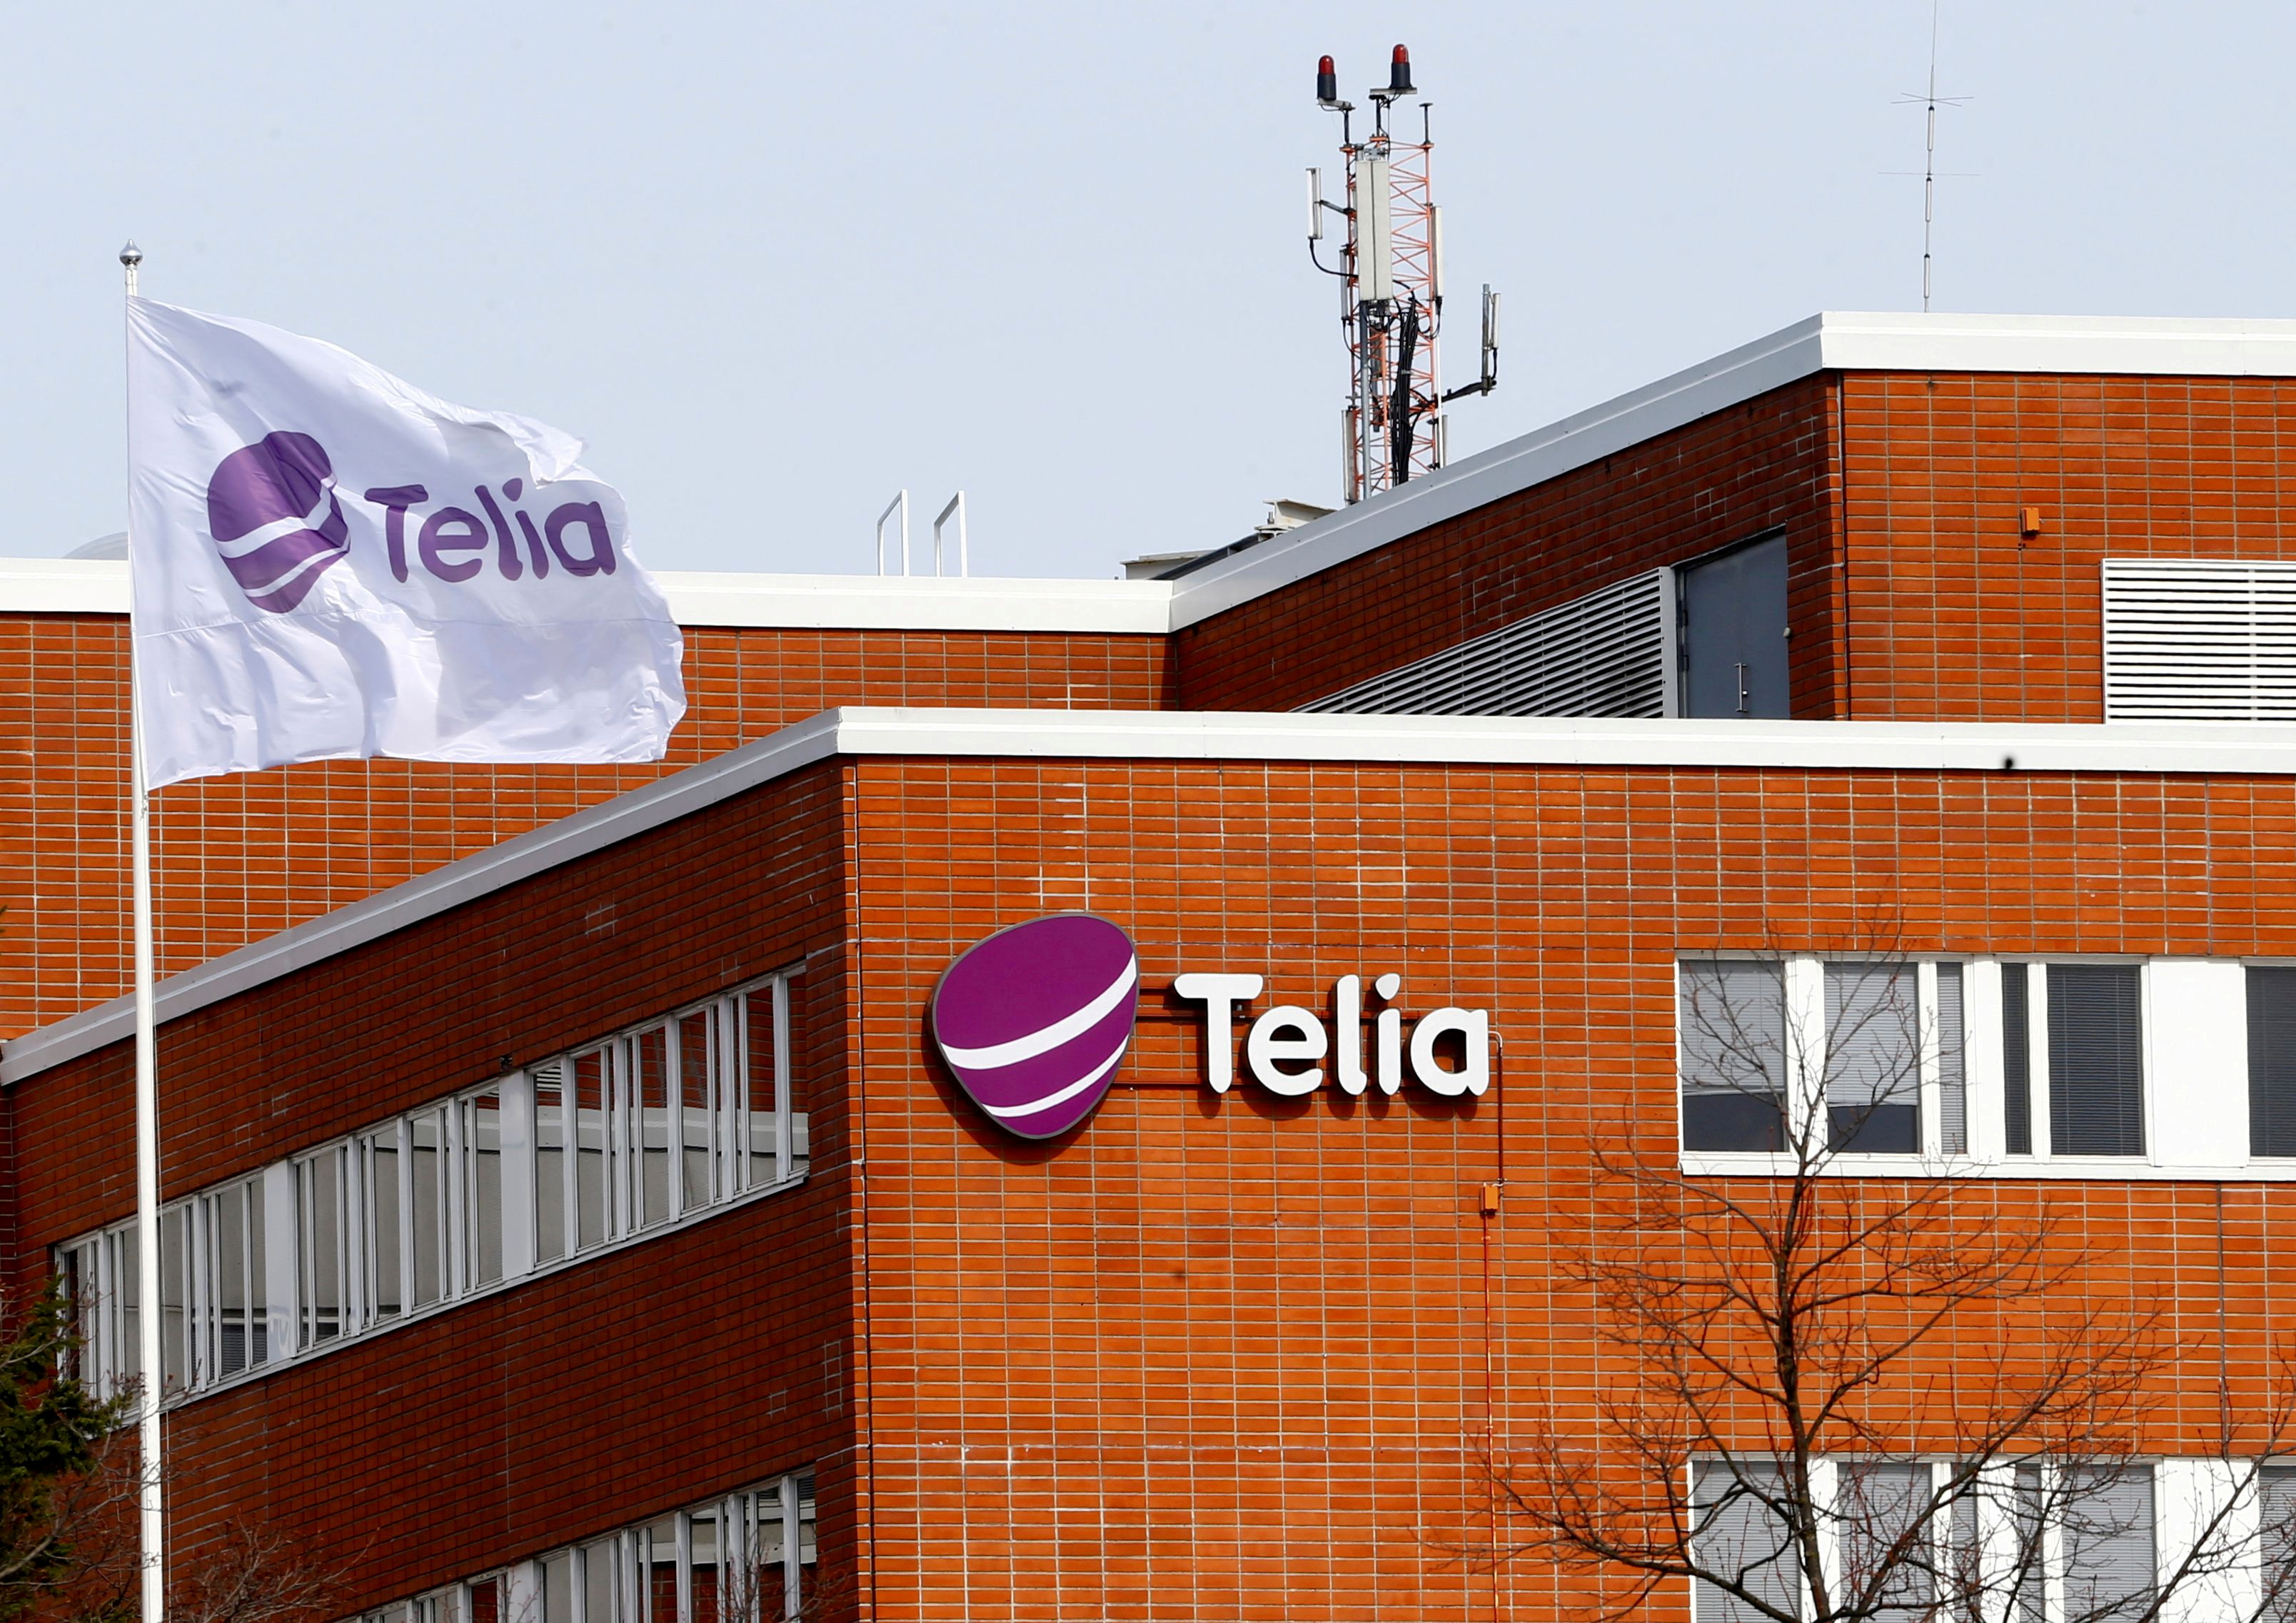 A flag flutters at the Telia offices in Helsinki